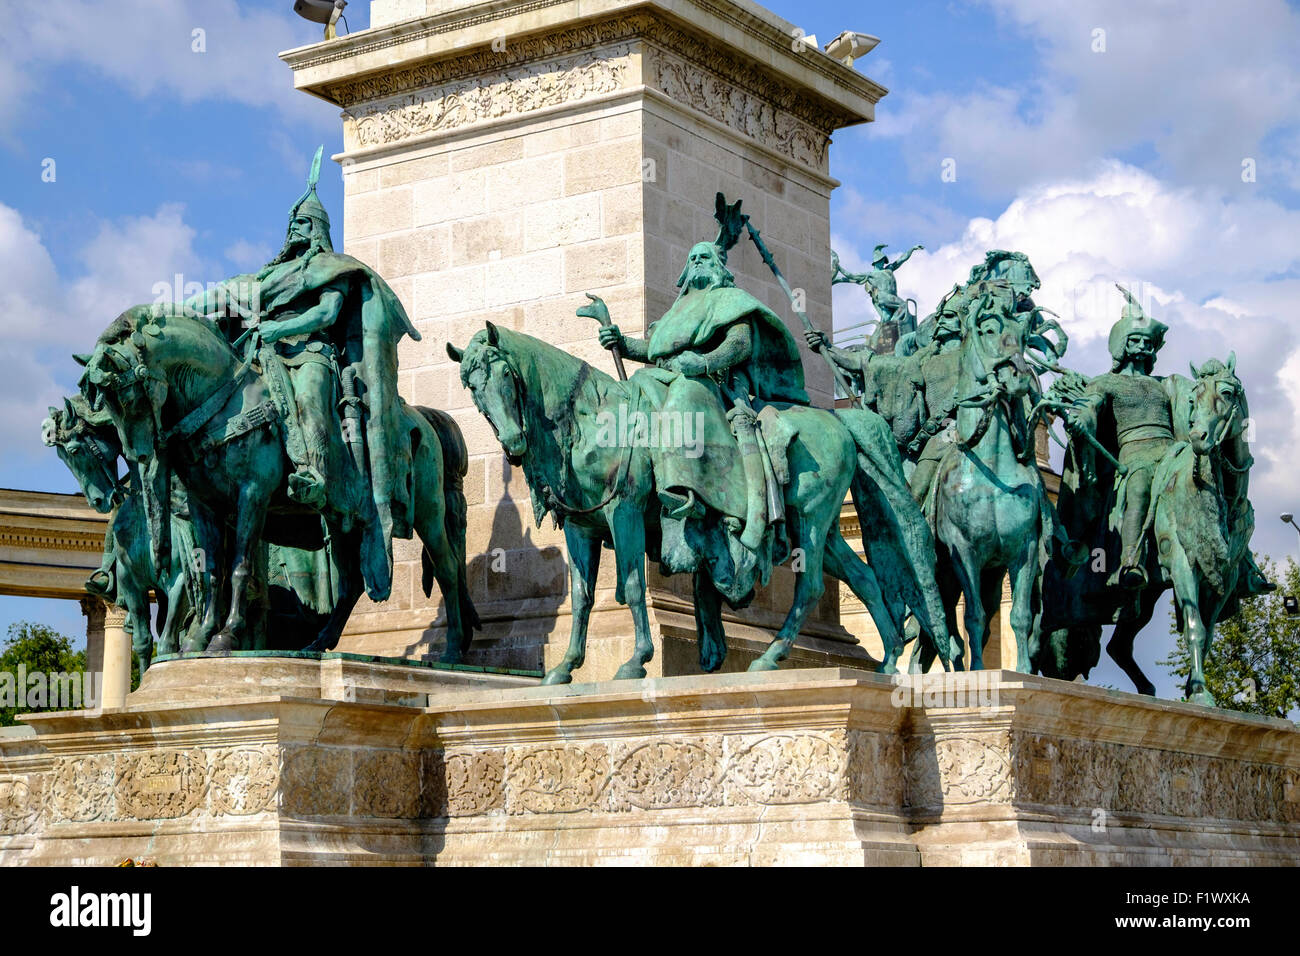 Millennium Monument, Heroes Square, Budapest, Hungary Europe. Statues of seven mounted Magyar chieftains around base of column Stock Photo